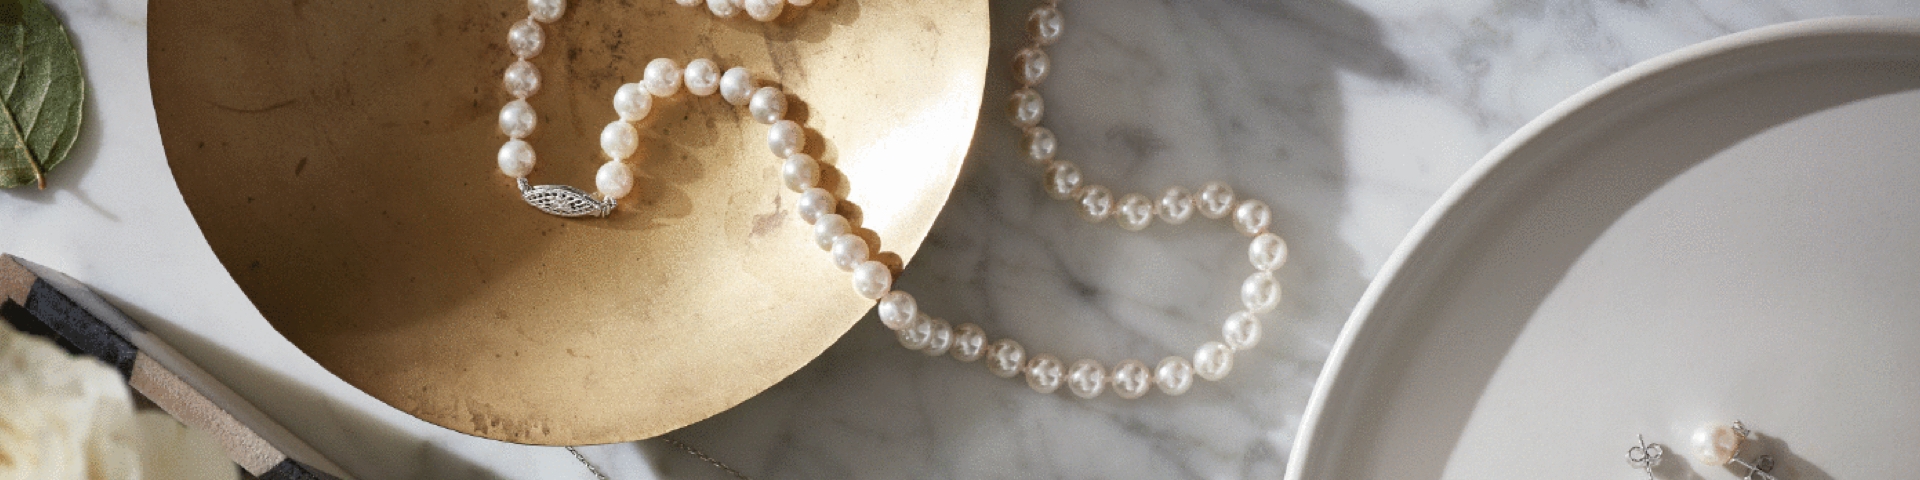 pearl necklace and earrings in bowls, how to take care of jewelry